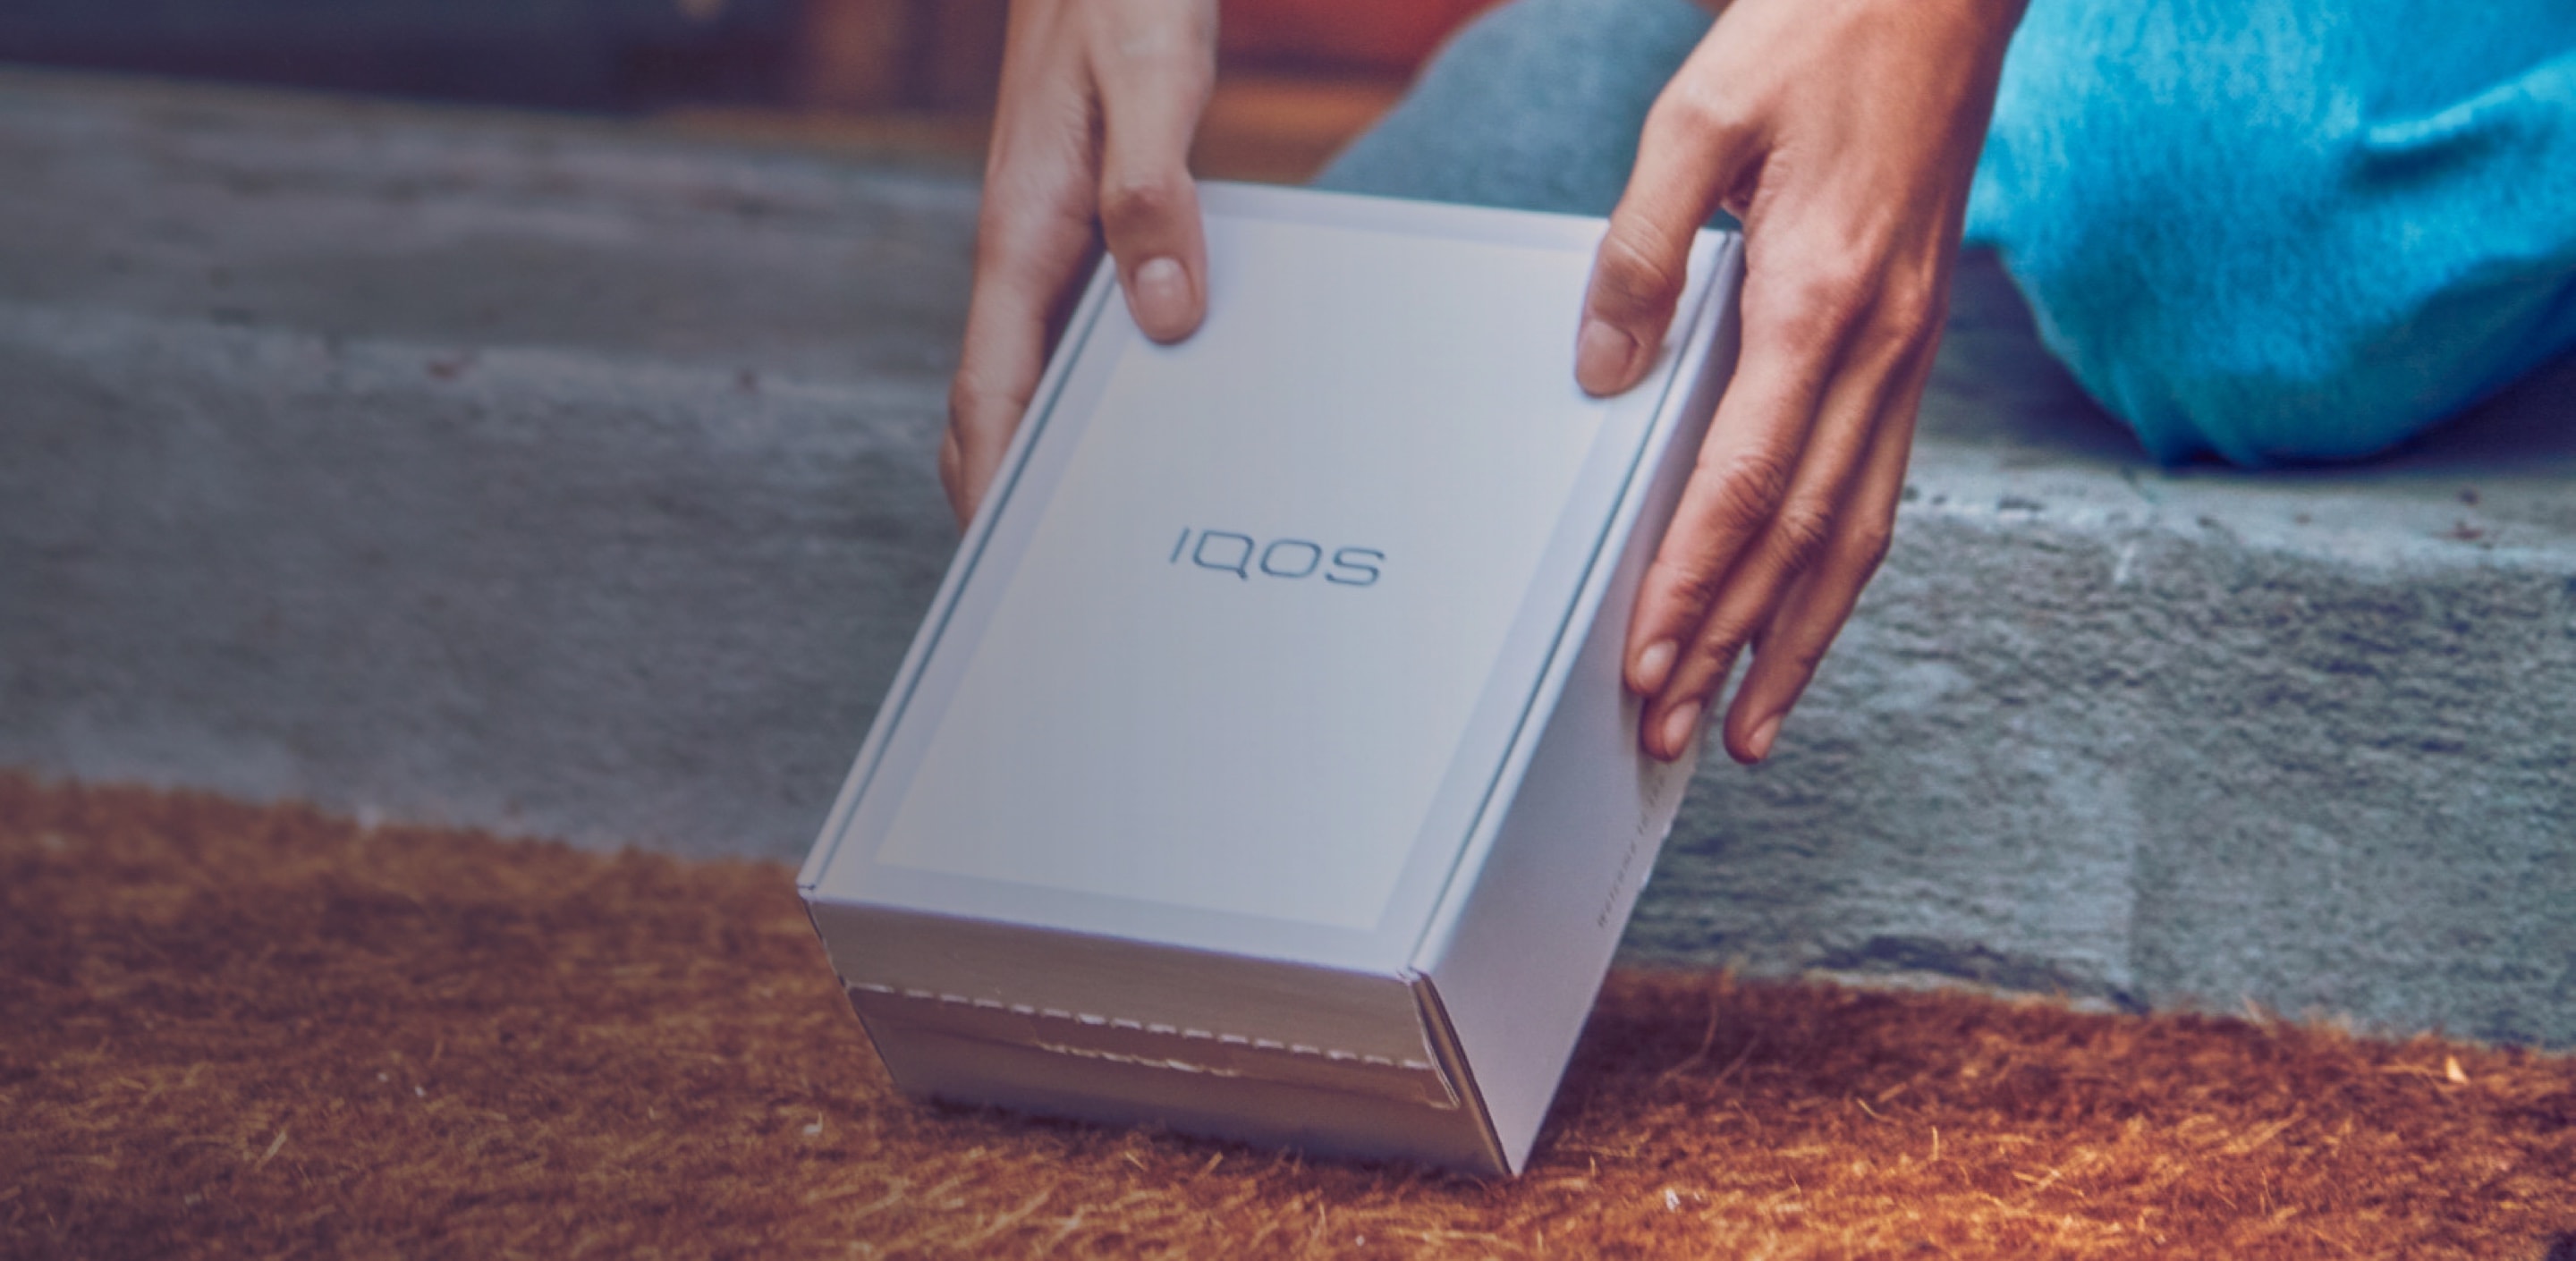 Two hands picking up a IQOS device box.